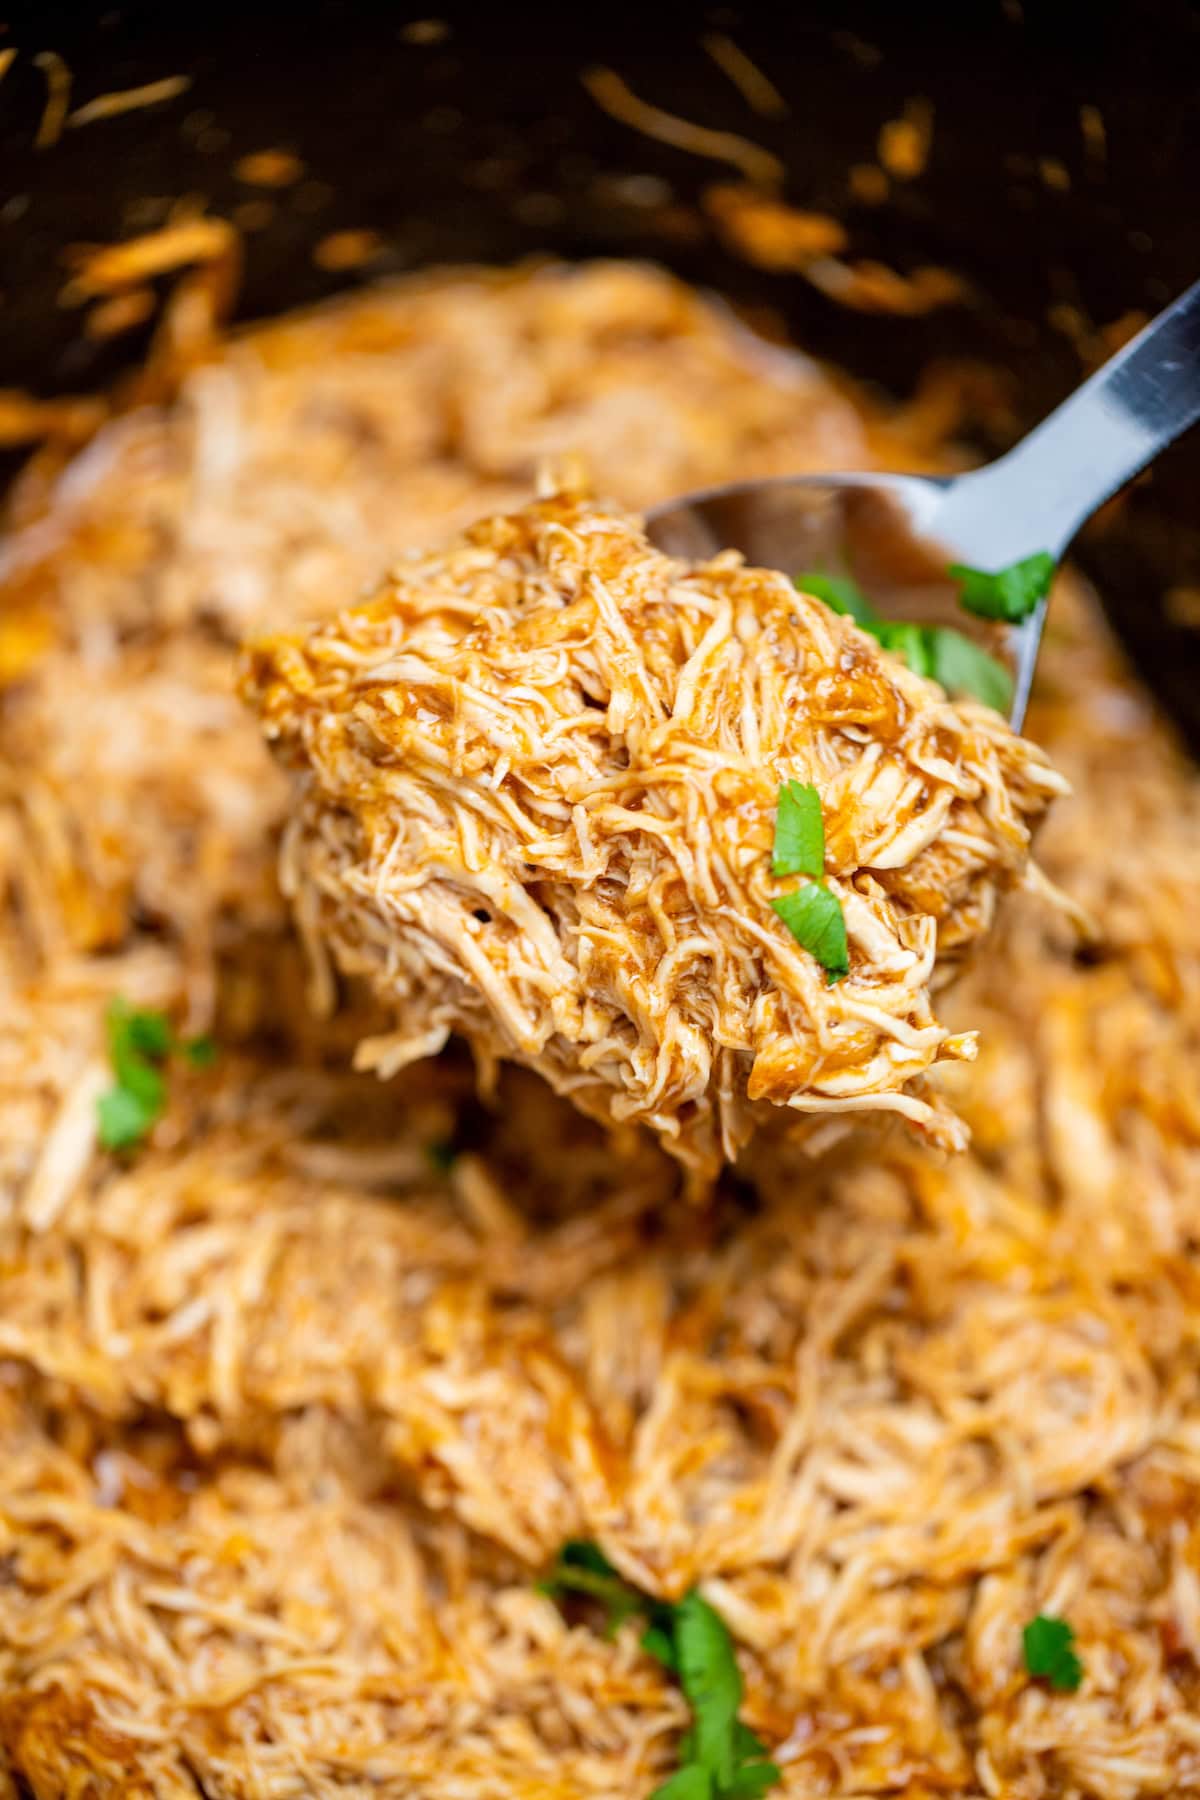 A slow cooker with saucy shredded BBQ chicken and a spoon lifting up the chicken.